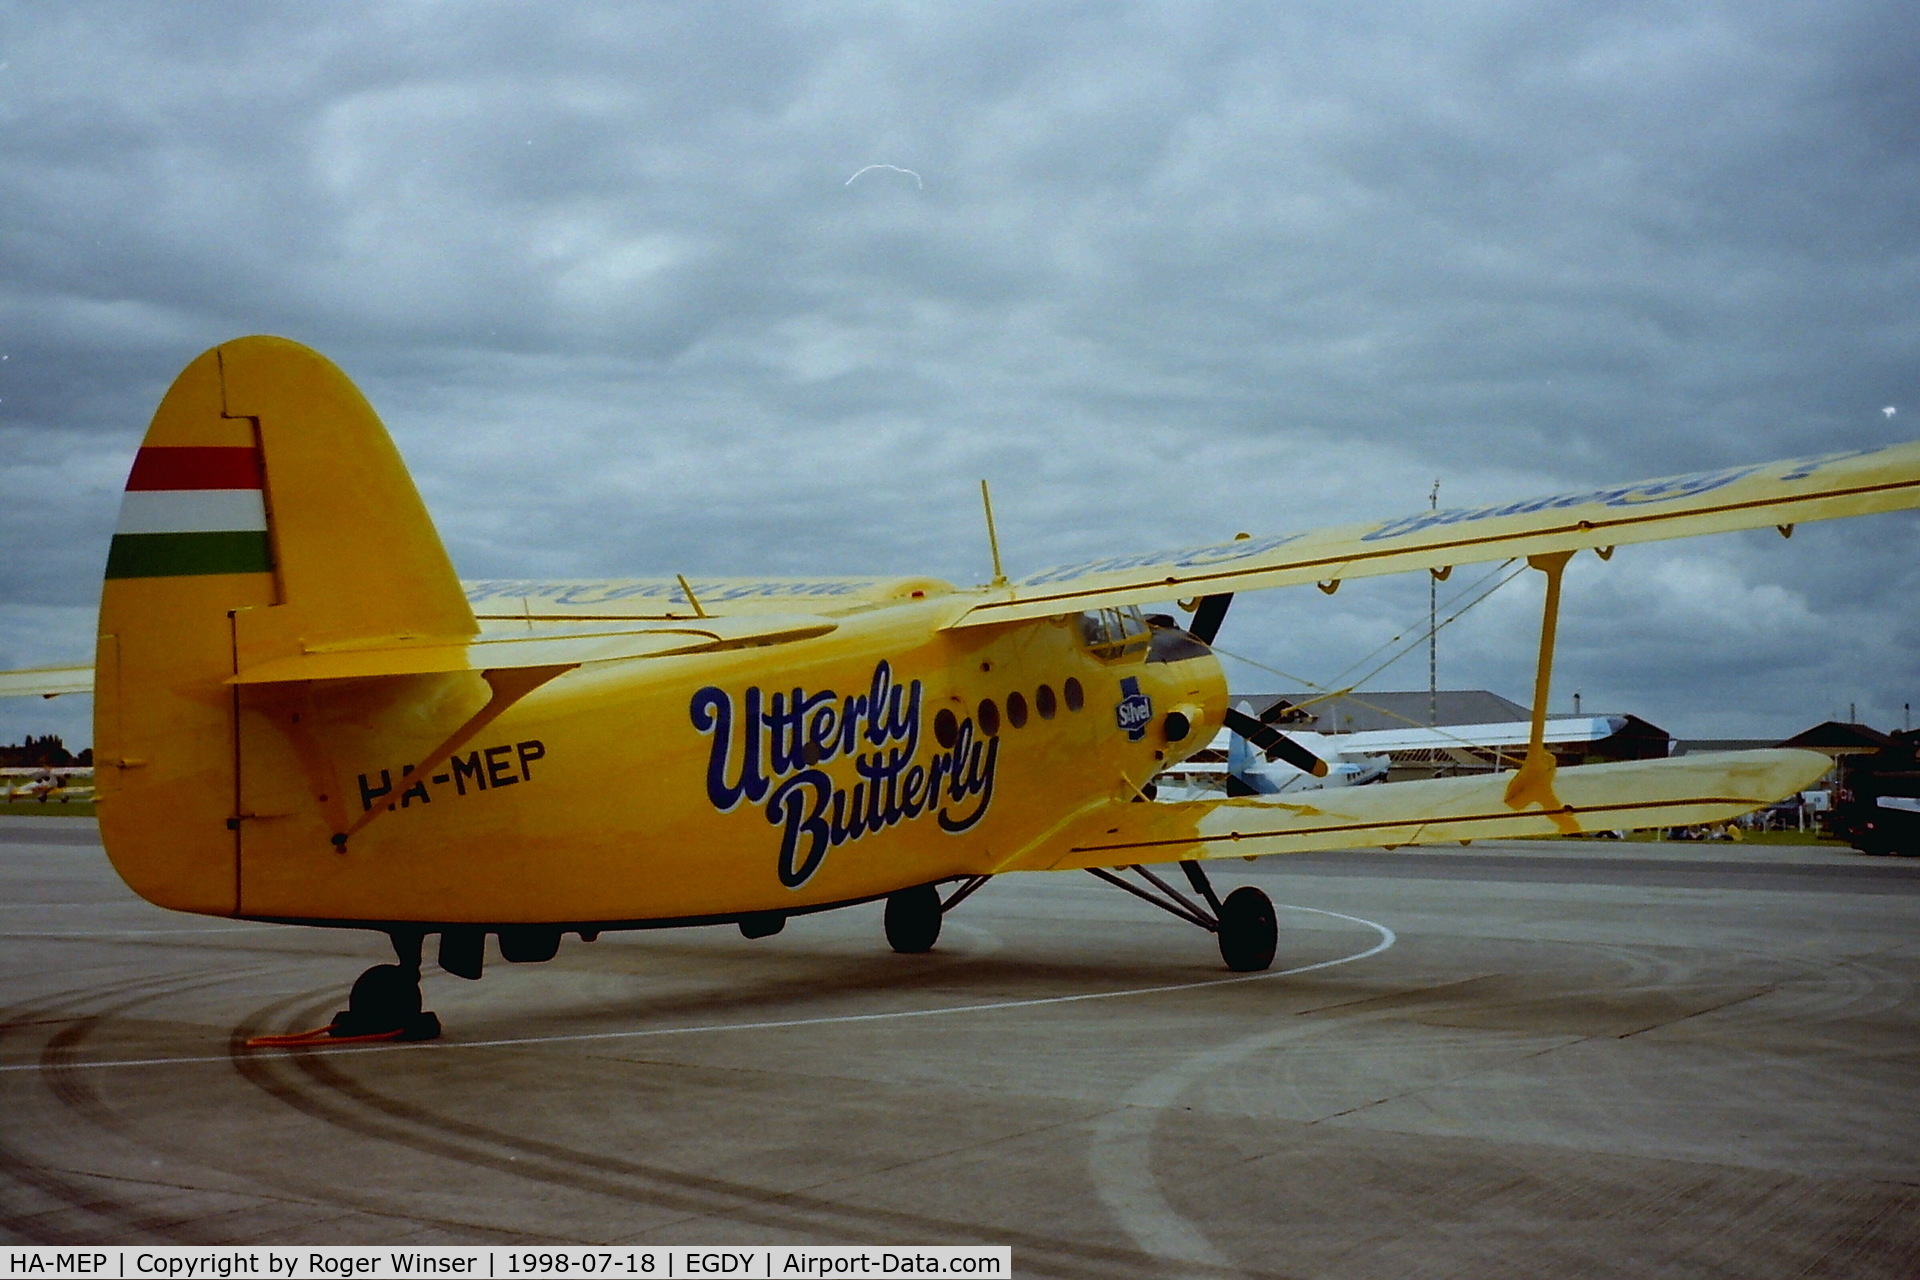 HA-MEP, 1980 Antonov An-2R C/N 1G190-25, St Ivel Utterly Butterly display aircraft at RNAS Yeovilton Air Day in 1998.